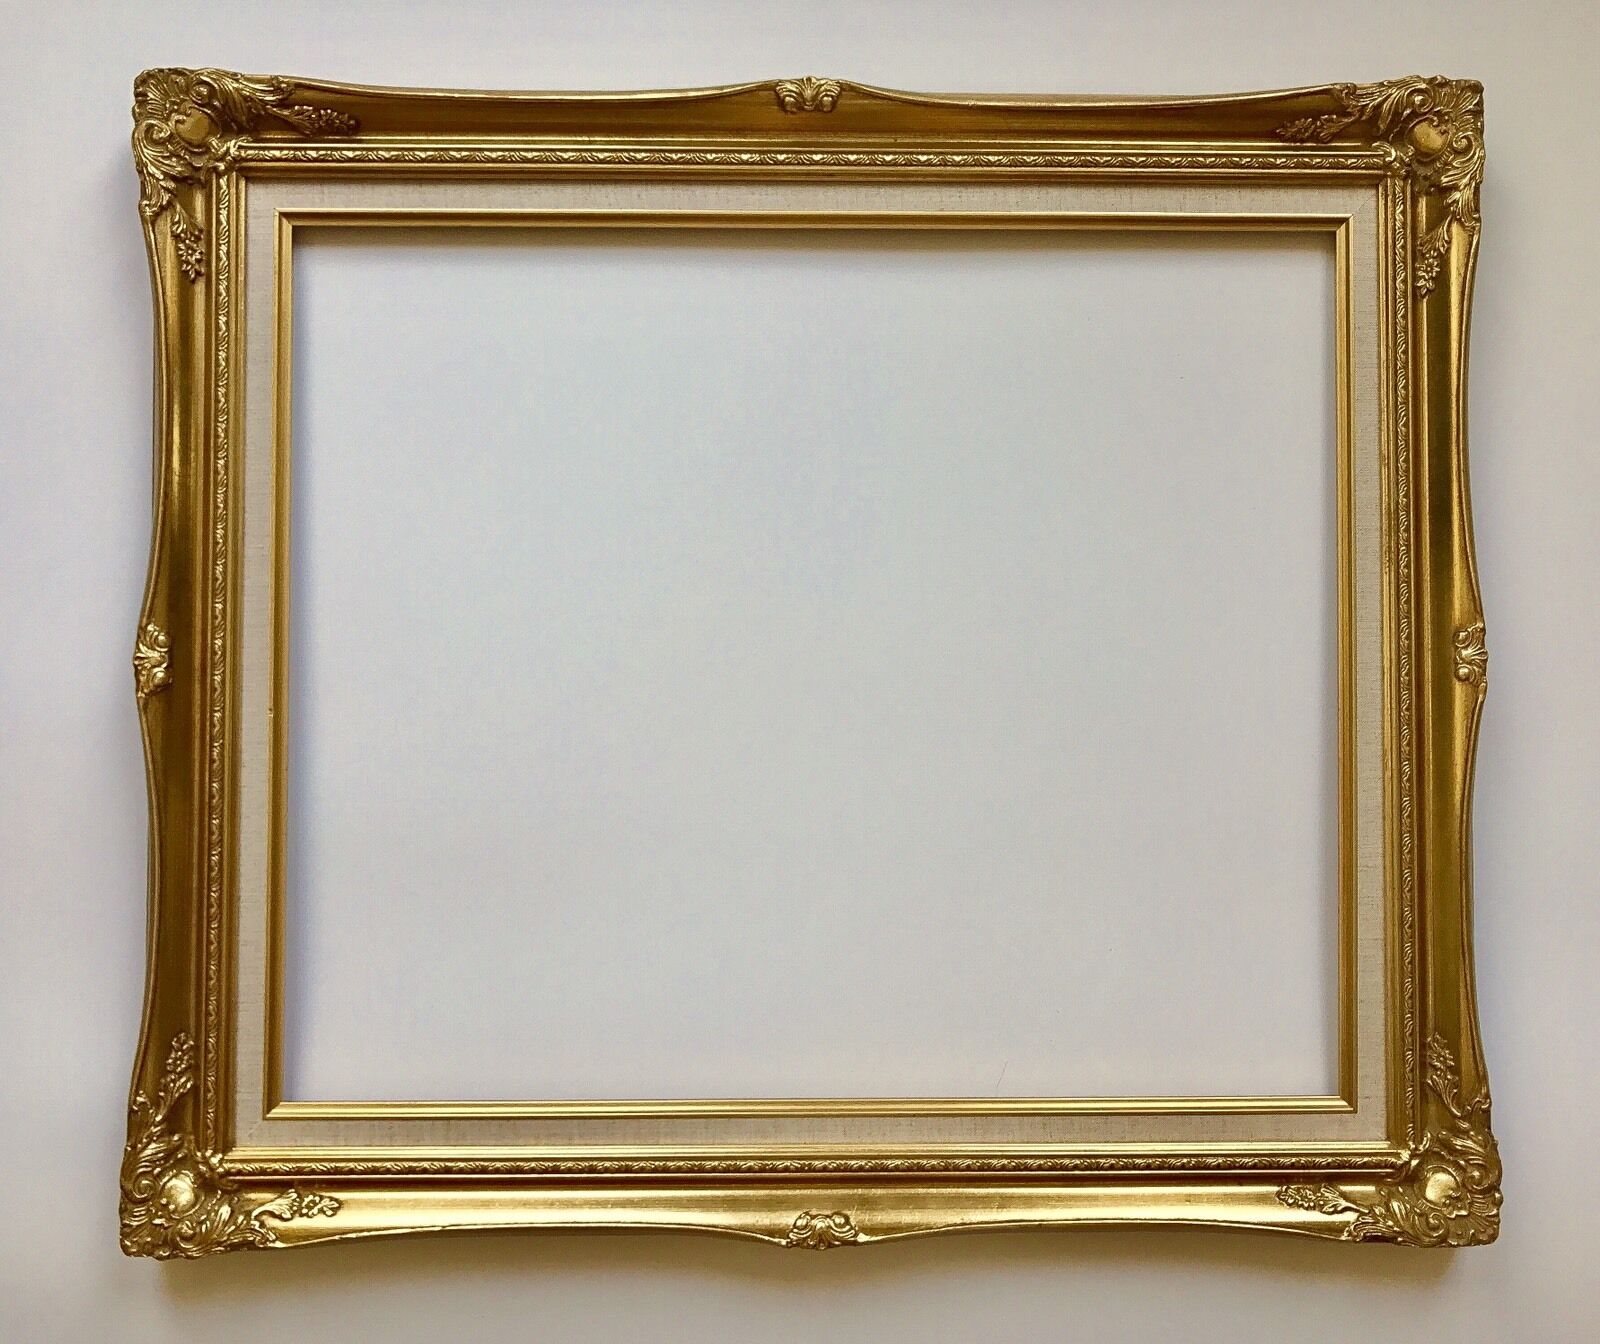 A Vintage Gilt Decorated Wooden Carved Picture Frame